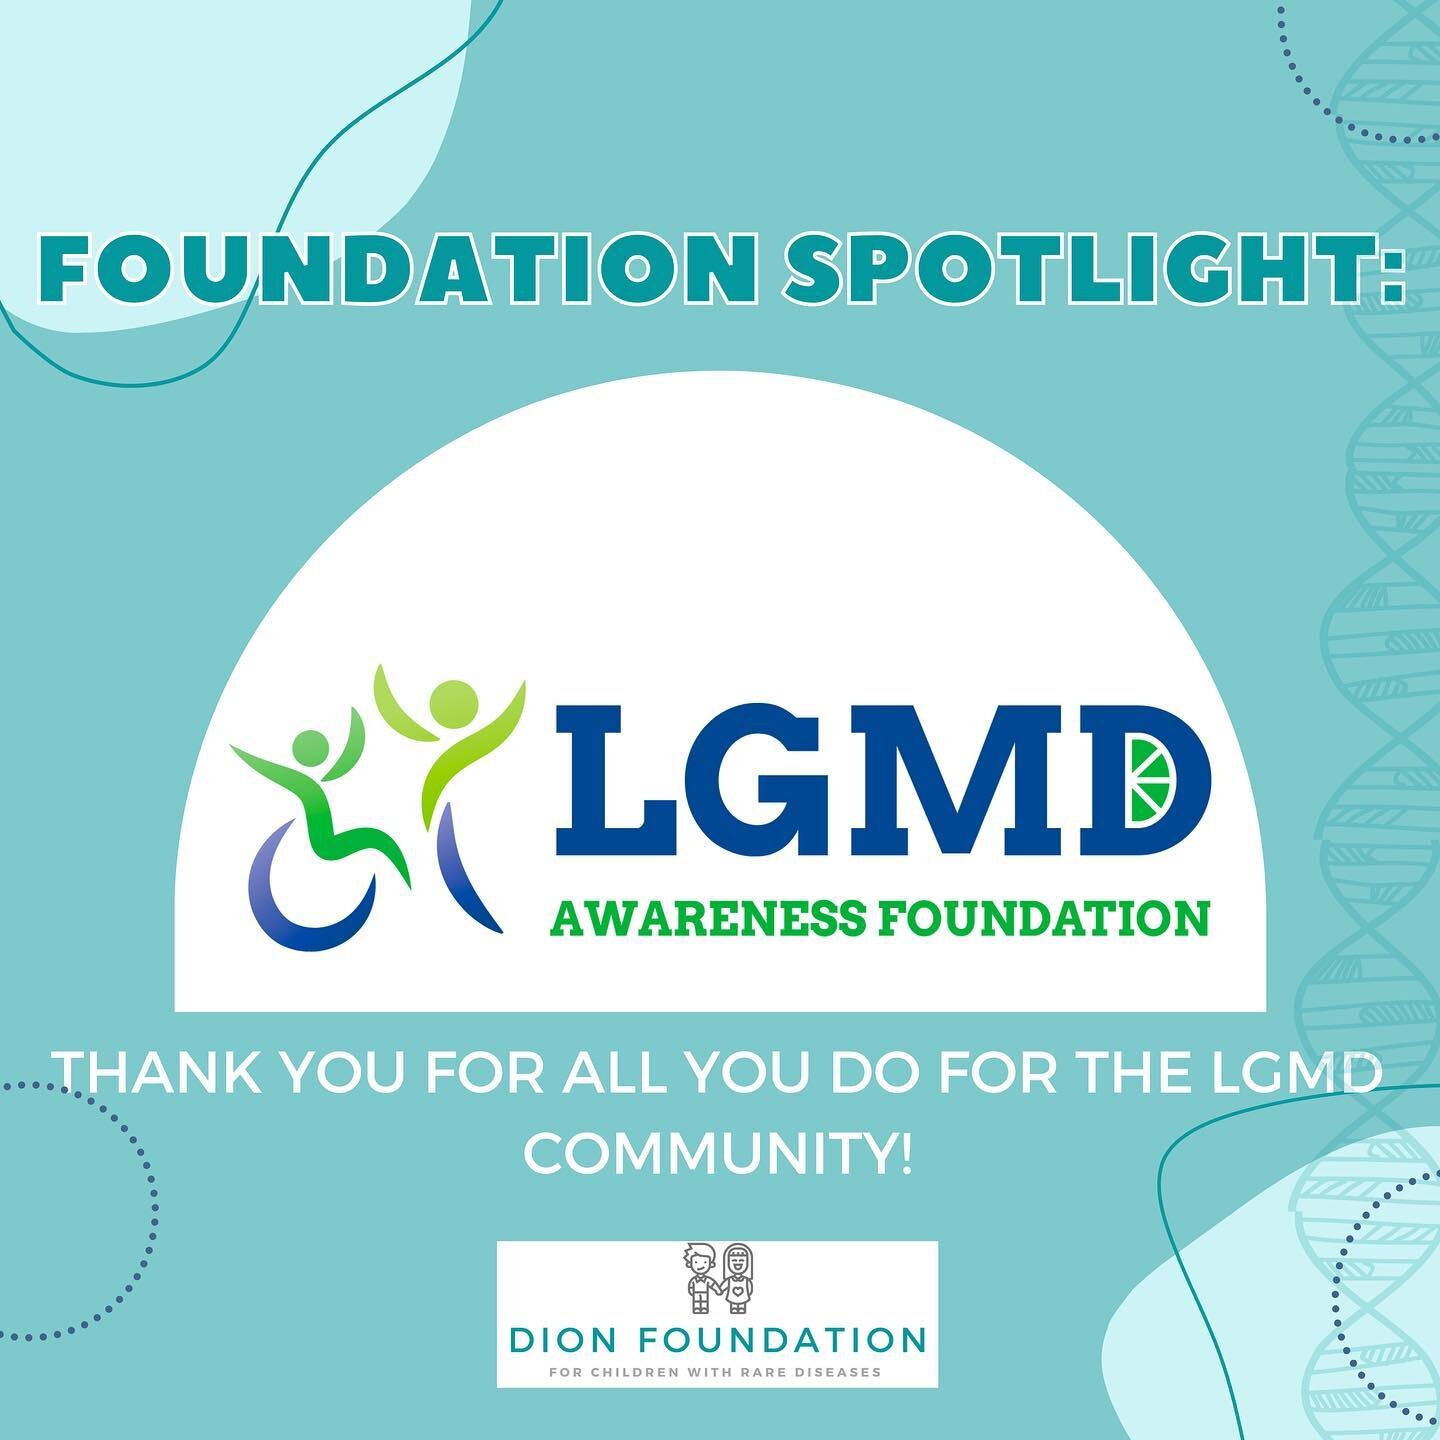 FOUNDATION SPOTLIGHT! 

Thank you @lgmdawareness for all you do in raising awareness and advocating for individuals living with limb-girdle muscular dystrophy. 

LGMD Awareness Foundation has an incredible website with resources, events and various c